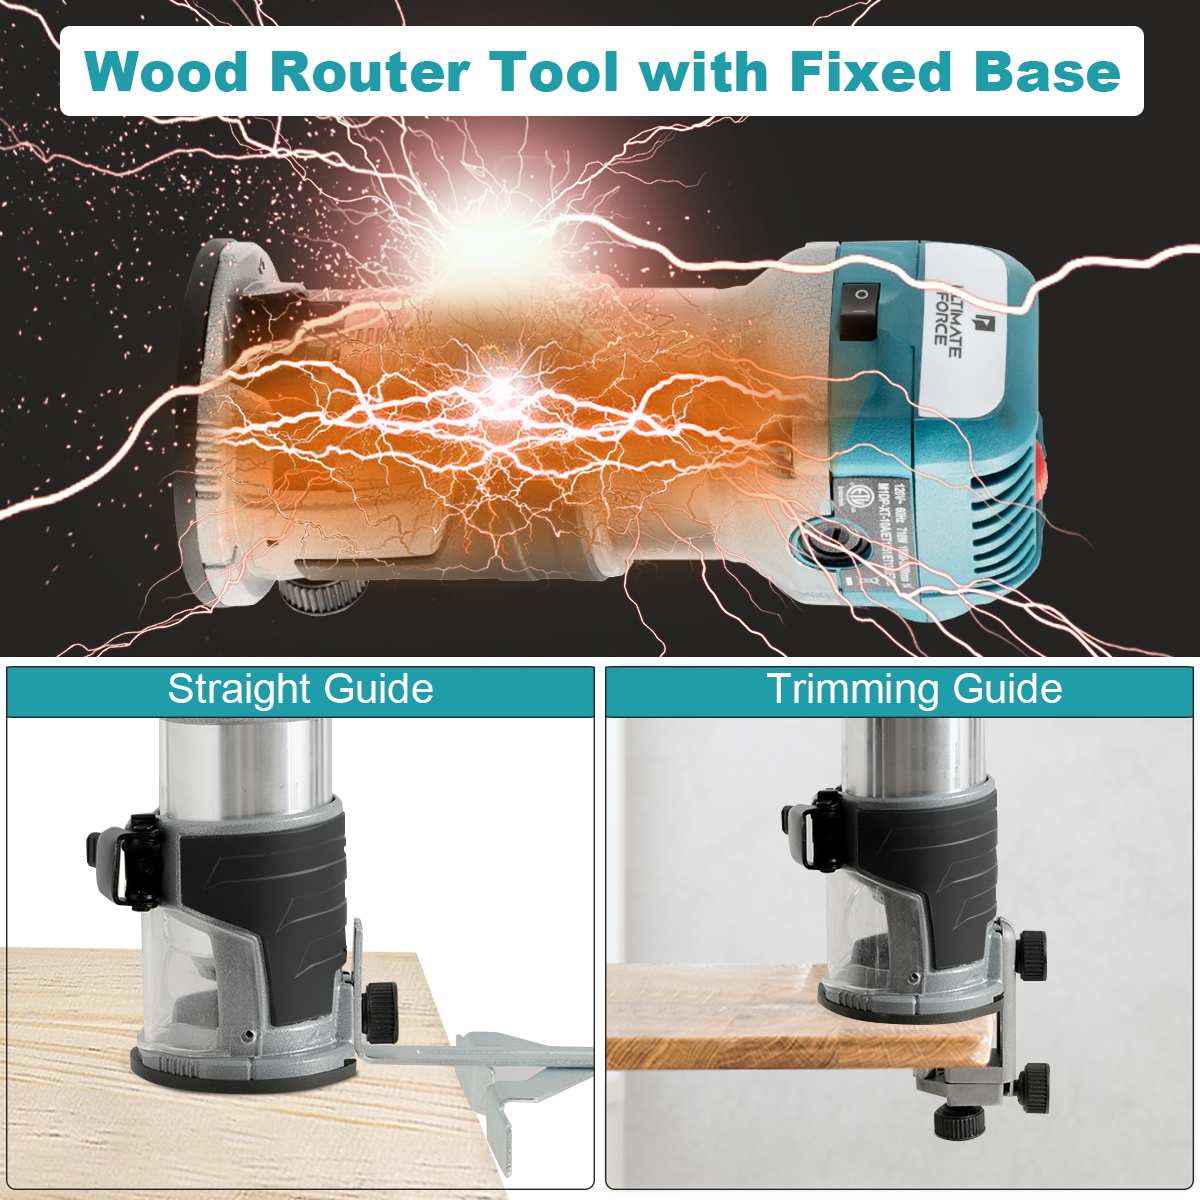 1.25HP Palm Router Kit Variable Speed Woodworking Tool w/ Fixed BasePlunge  Base